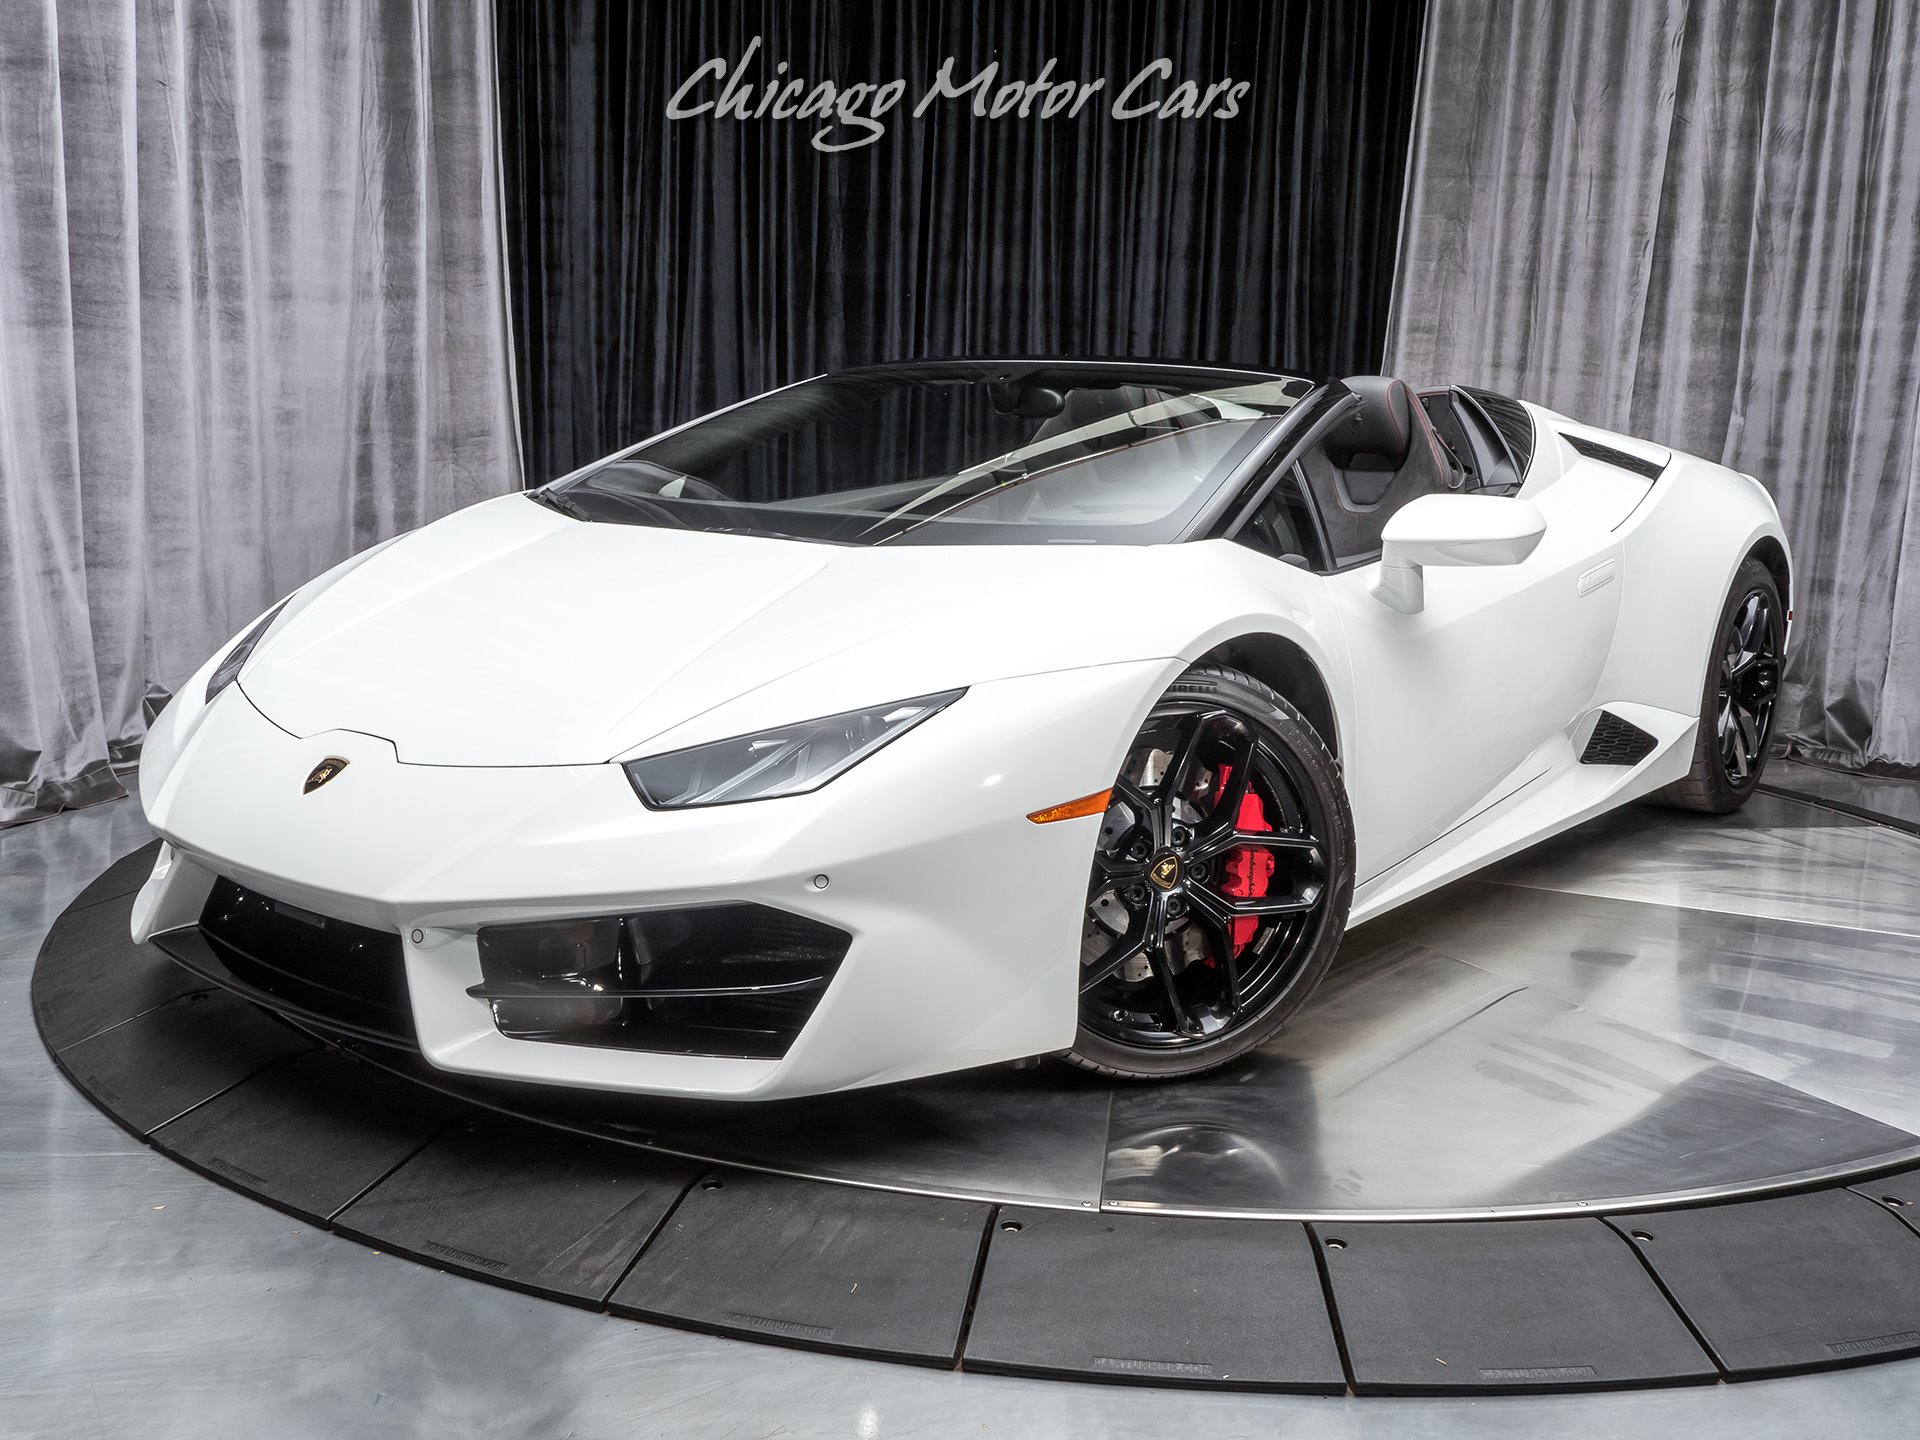 Used 2017 Lamborghini Huracan Lp580 2 Spyder Convertible For Sale Special Pricing Chicago 9432